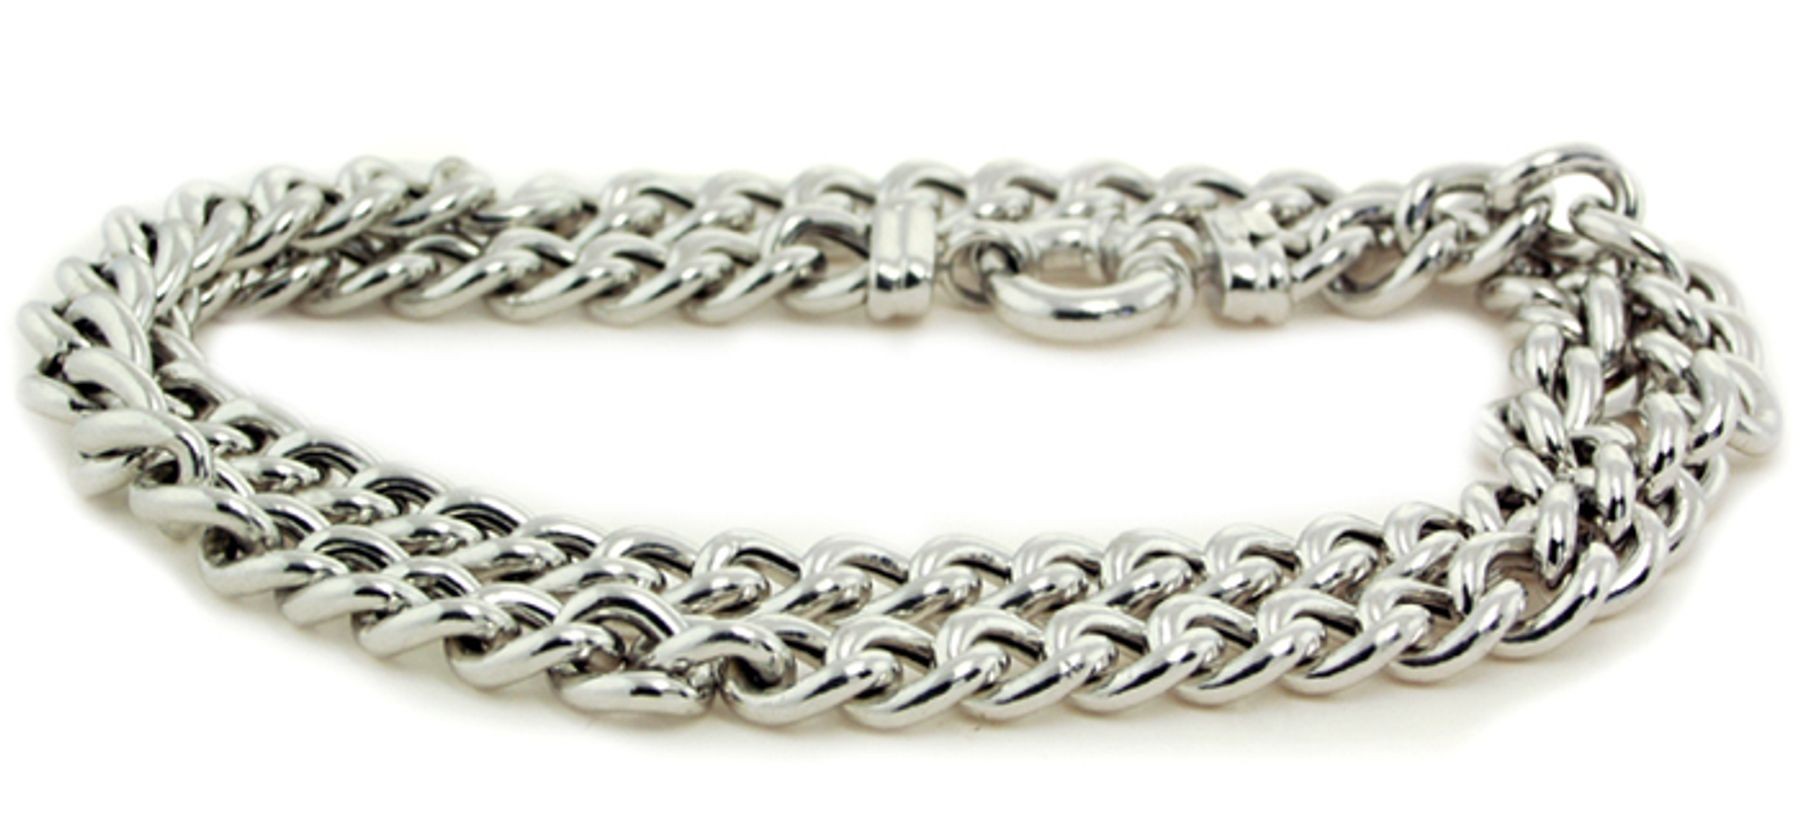 Platinum Link Chain. View Chains and Bracelets.